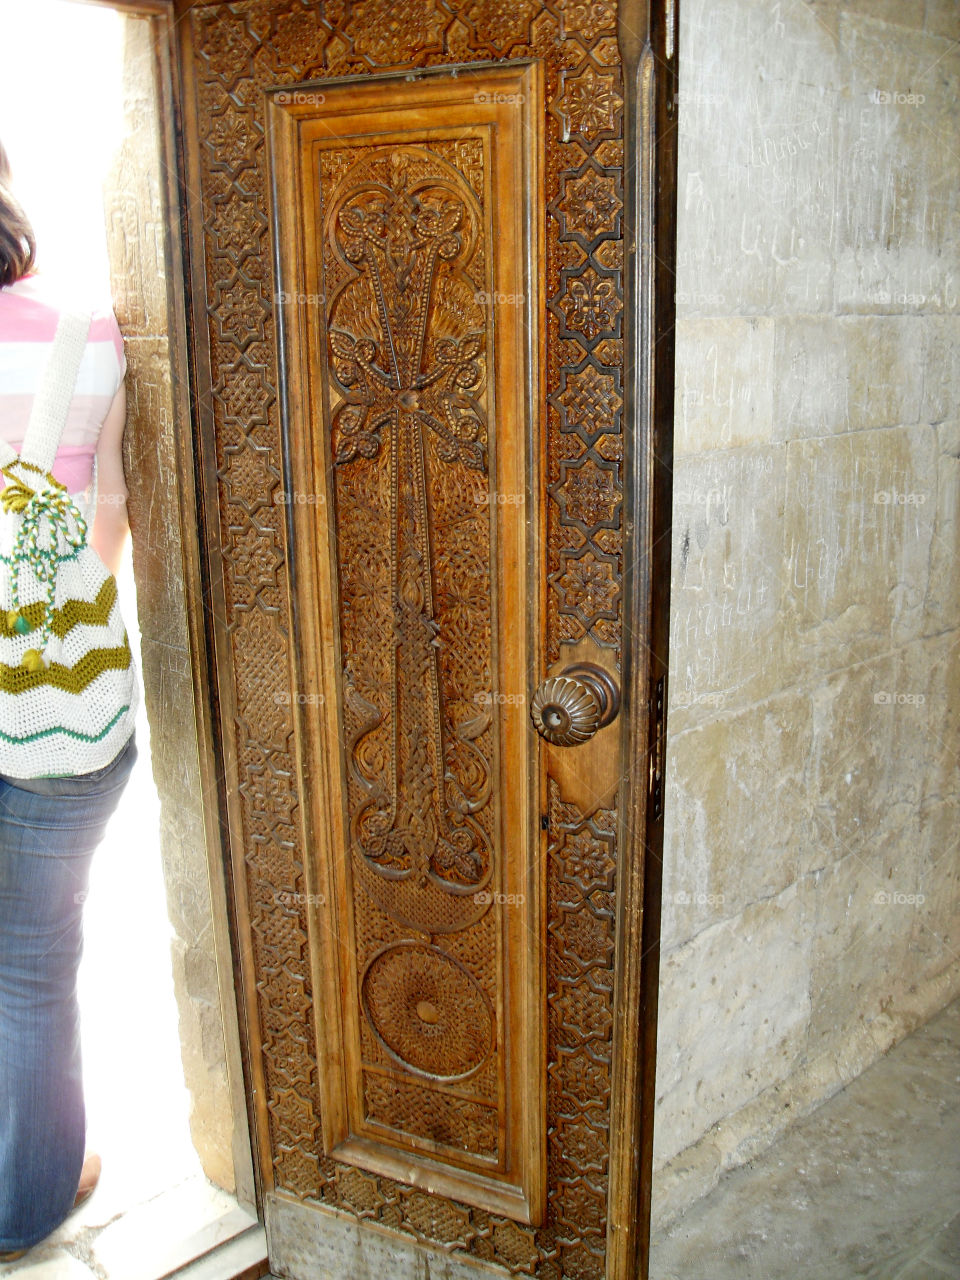 Old monastery door with carving